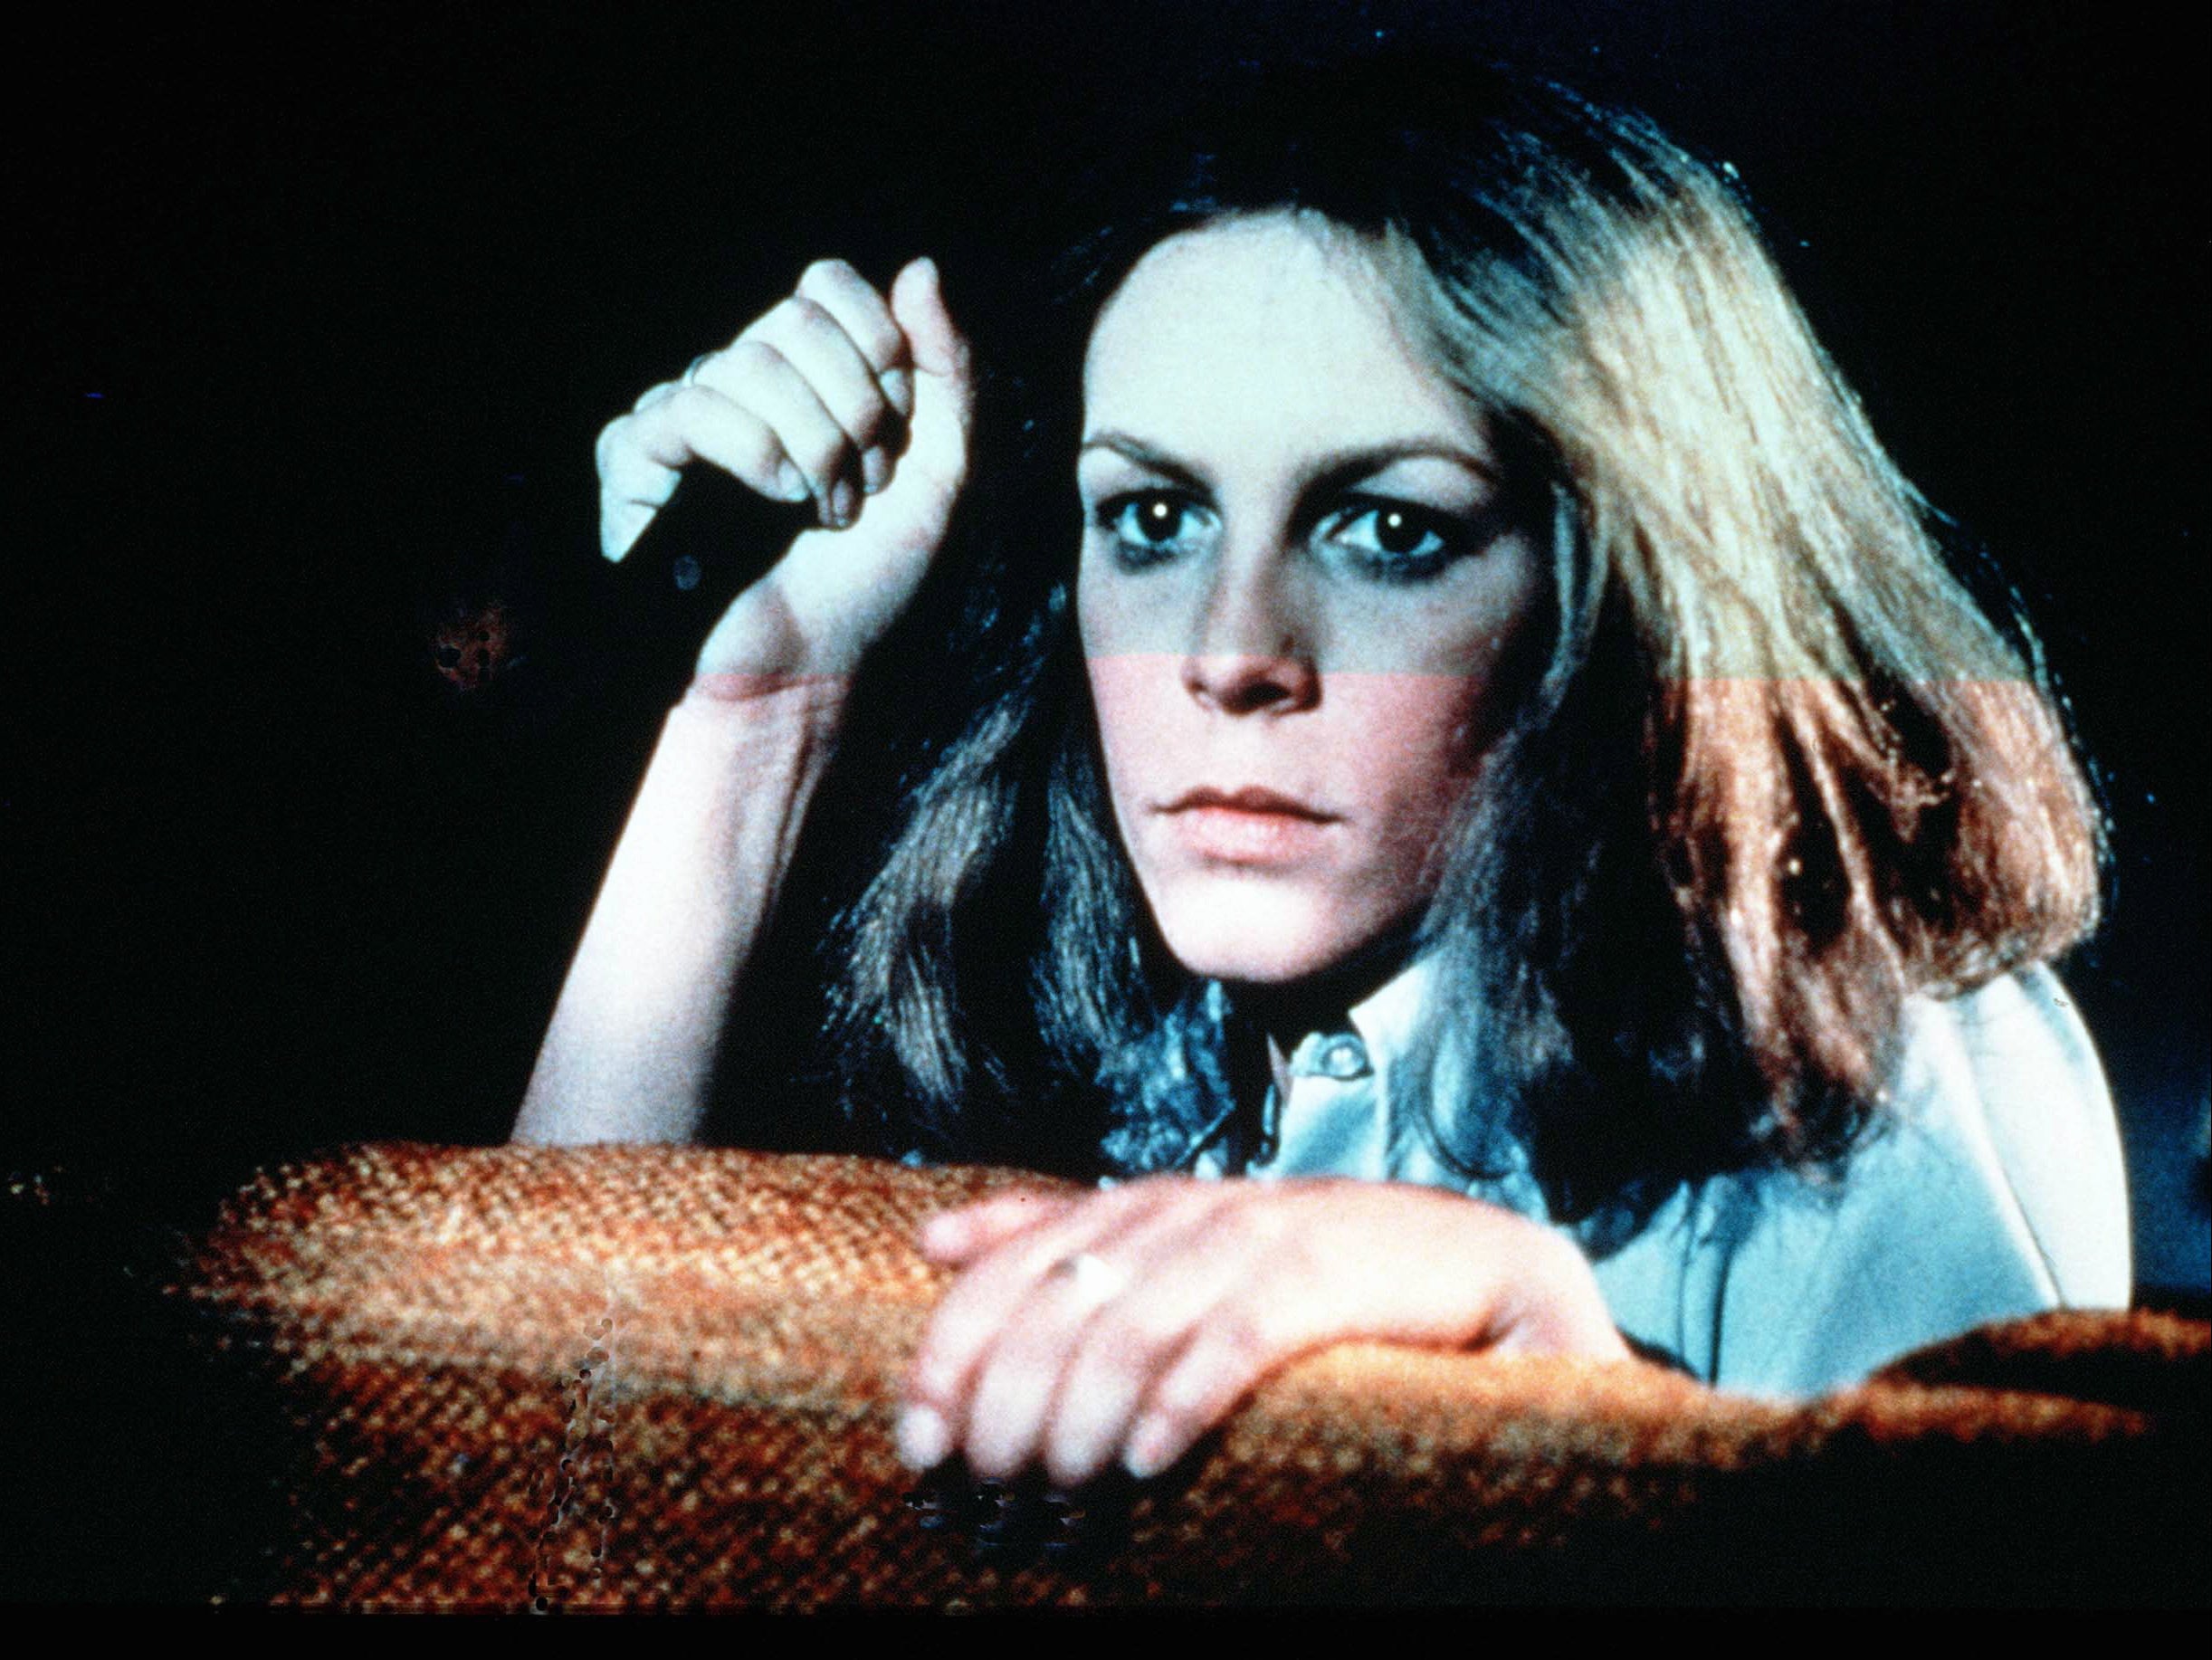 Curtis as Laurie in 1978’s ‘Halloween'